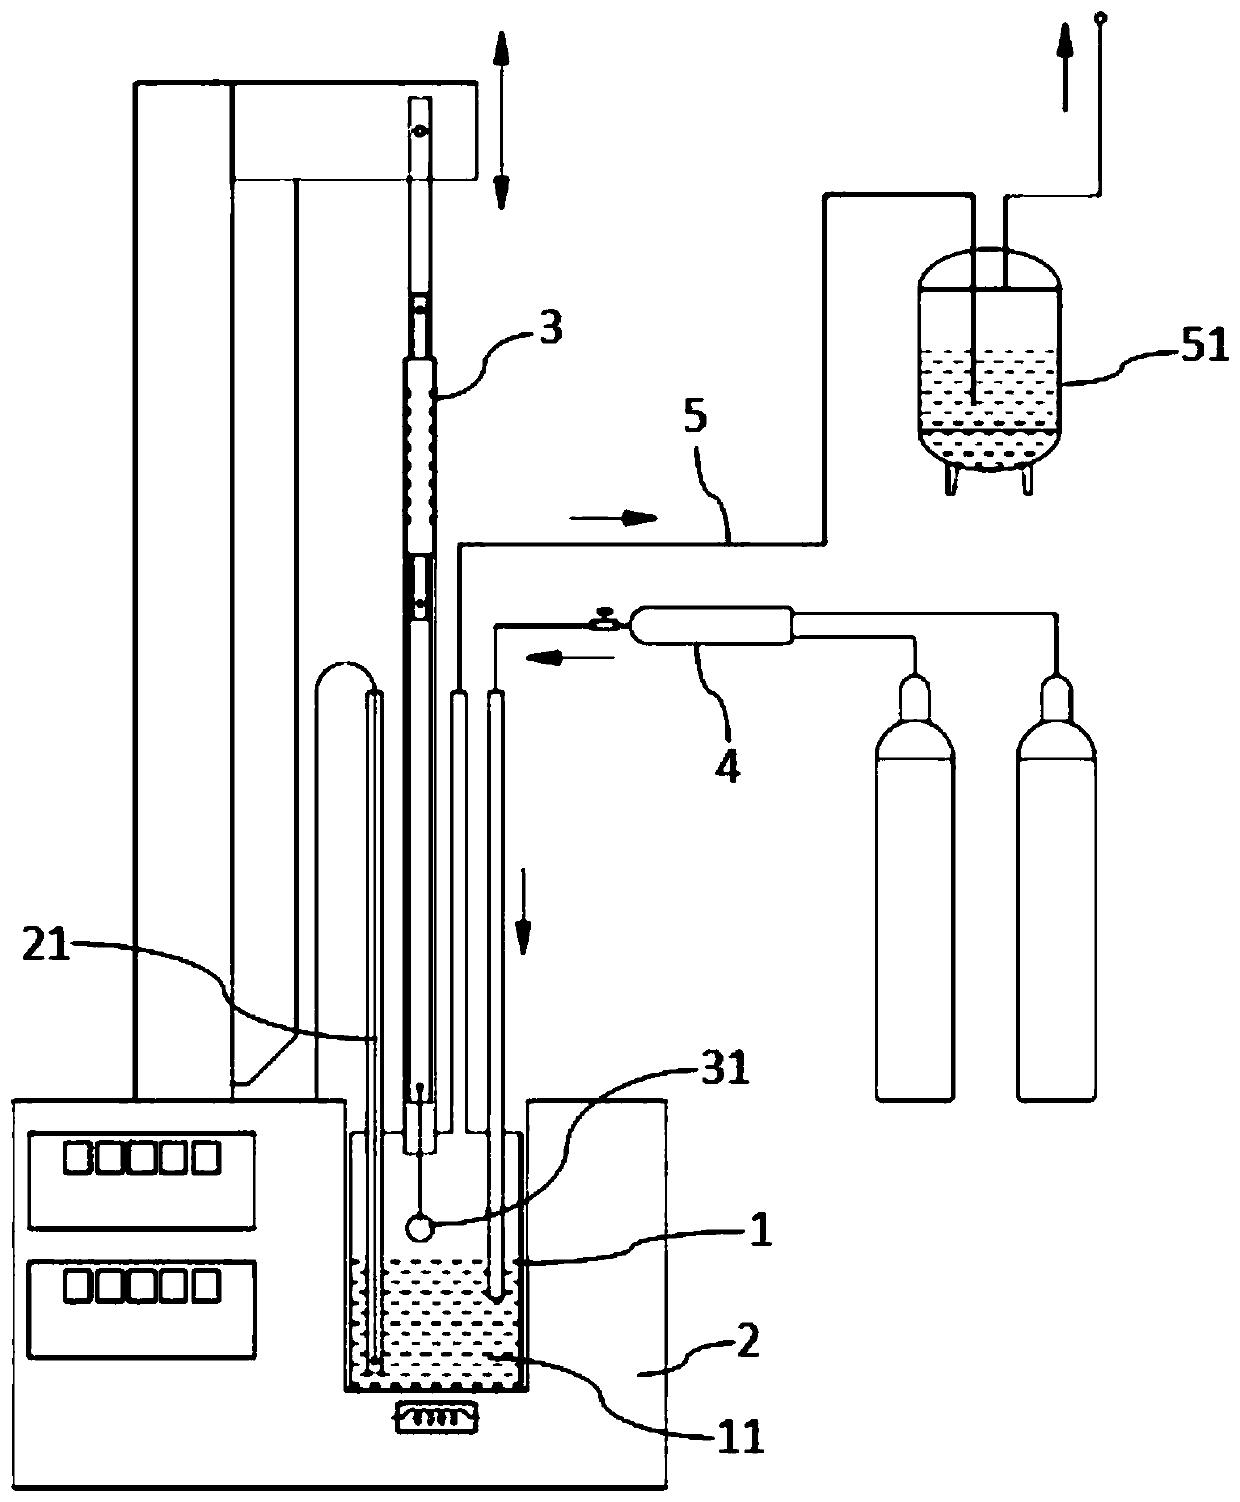 A Simulation Method of Nuclear Material in Molten Salt Reactor